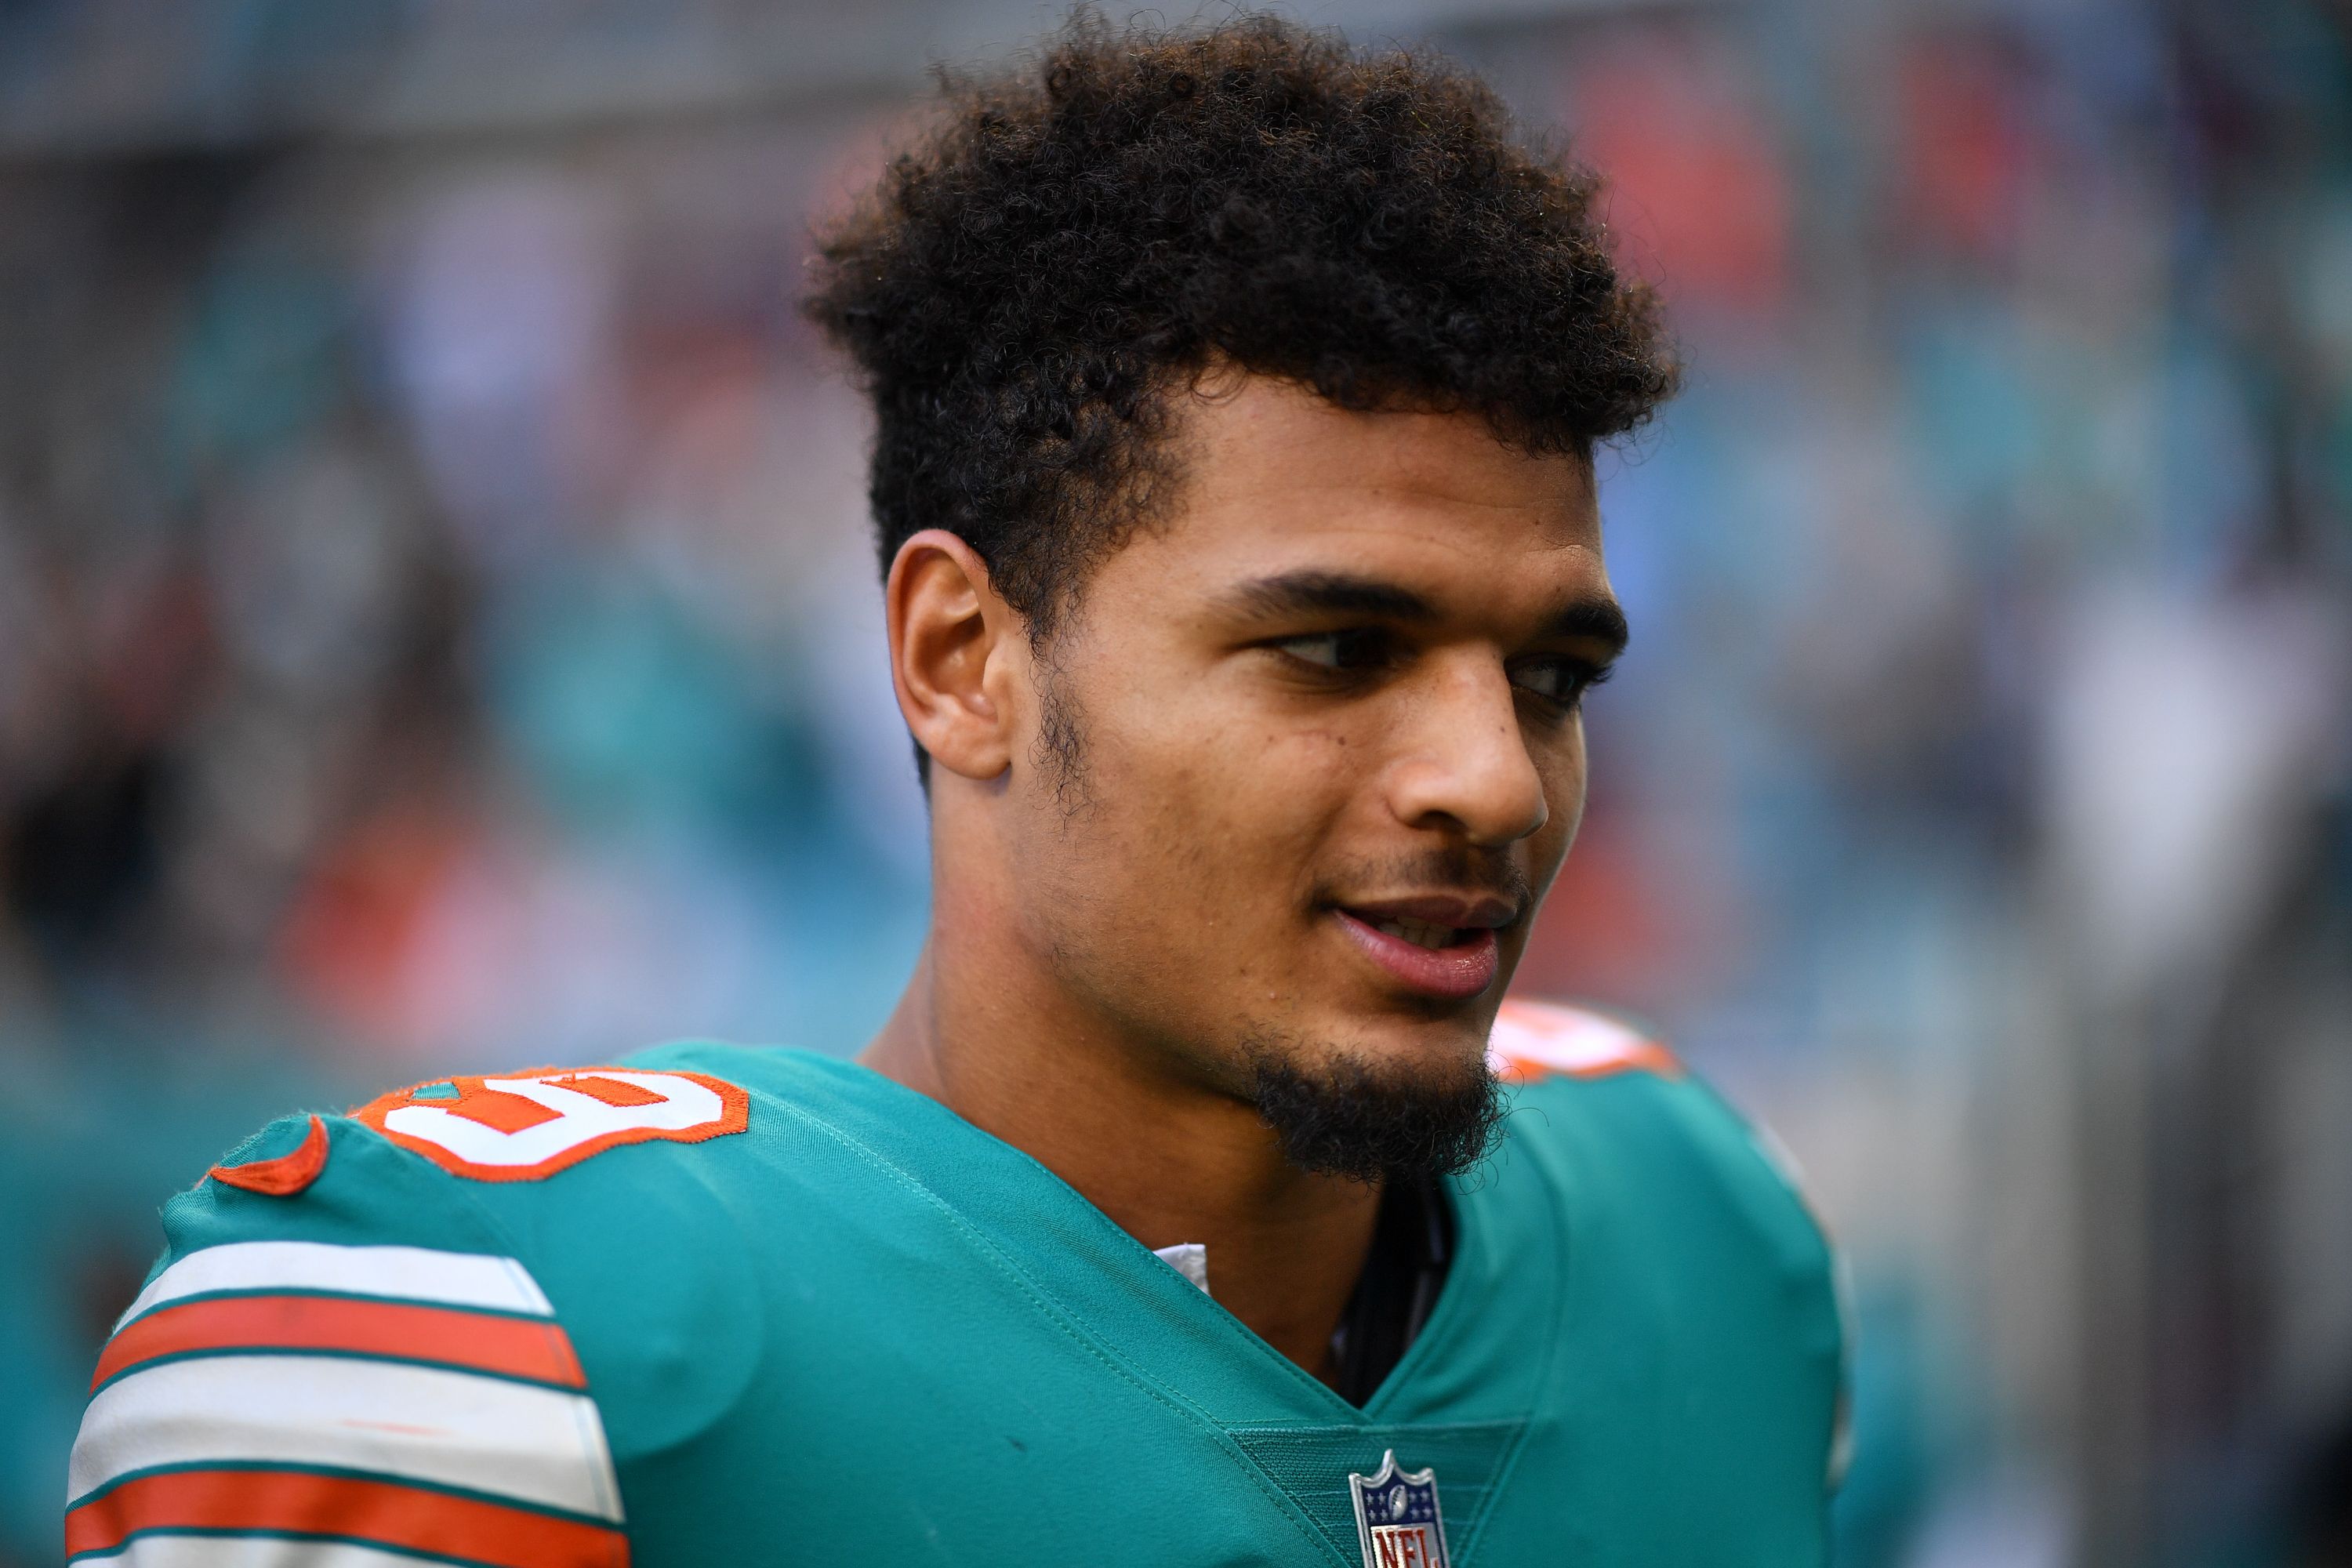 Minkah Fitzpatrick from Dolphins